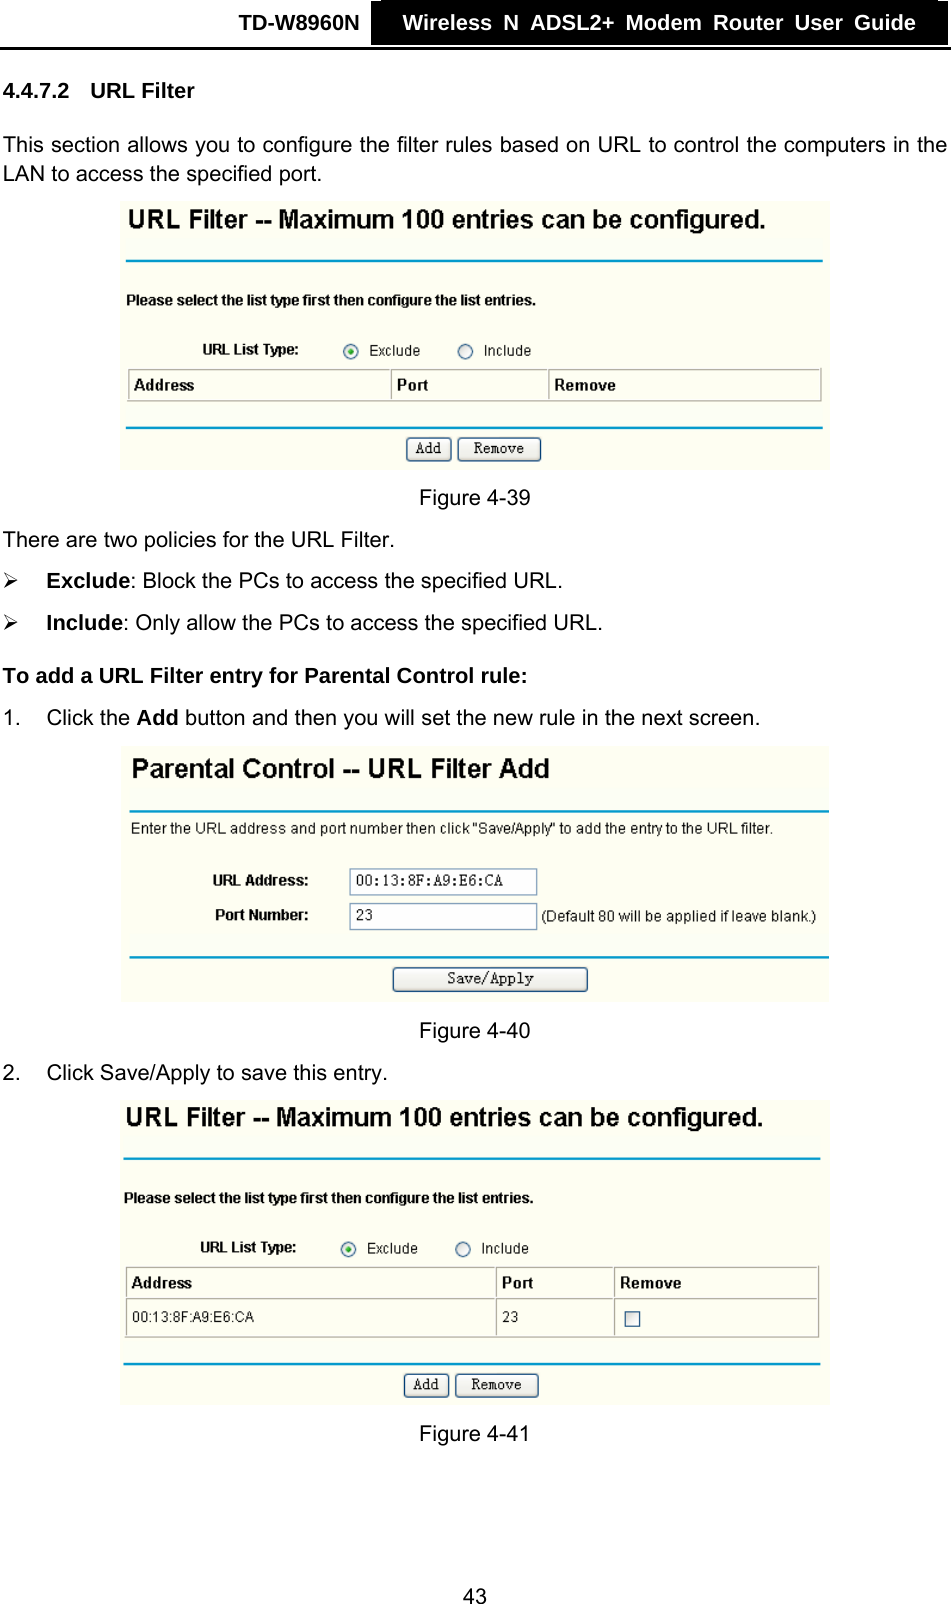 TD-W8960N    Wireless N ADSL2+ Modem Router User Guide    4.4.7.2  URL Filter This section allows you to configure the filter rules based on URL to control the computers in the LAN to access the specified port.  Figure 4-39 There are two policies for the URL Filter. ¾ Exclude: Block the PCs to access the specified URL. ¾ Include: Only allow the PCs to access the specified URL. To add a URL Filter entry for Parental Control rule: 1. Click the Add button and then you will set the new rule in the next screen.  Figure 4-40 2.  Click Save/Apply to save this entry.  Figure 4-41  43 